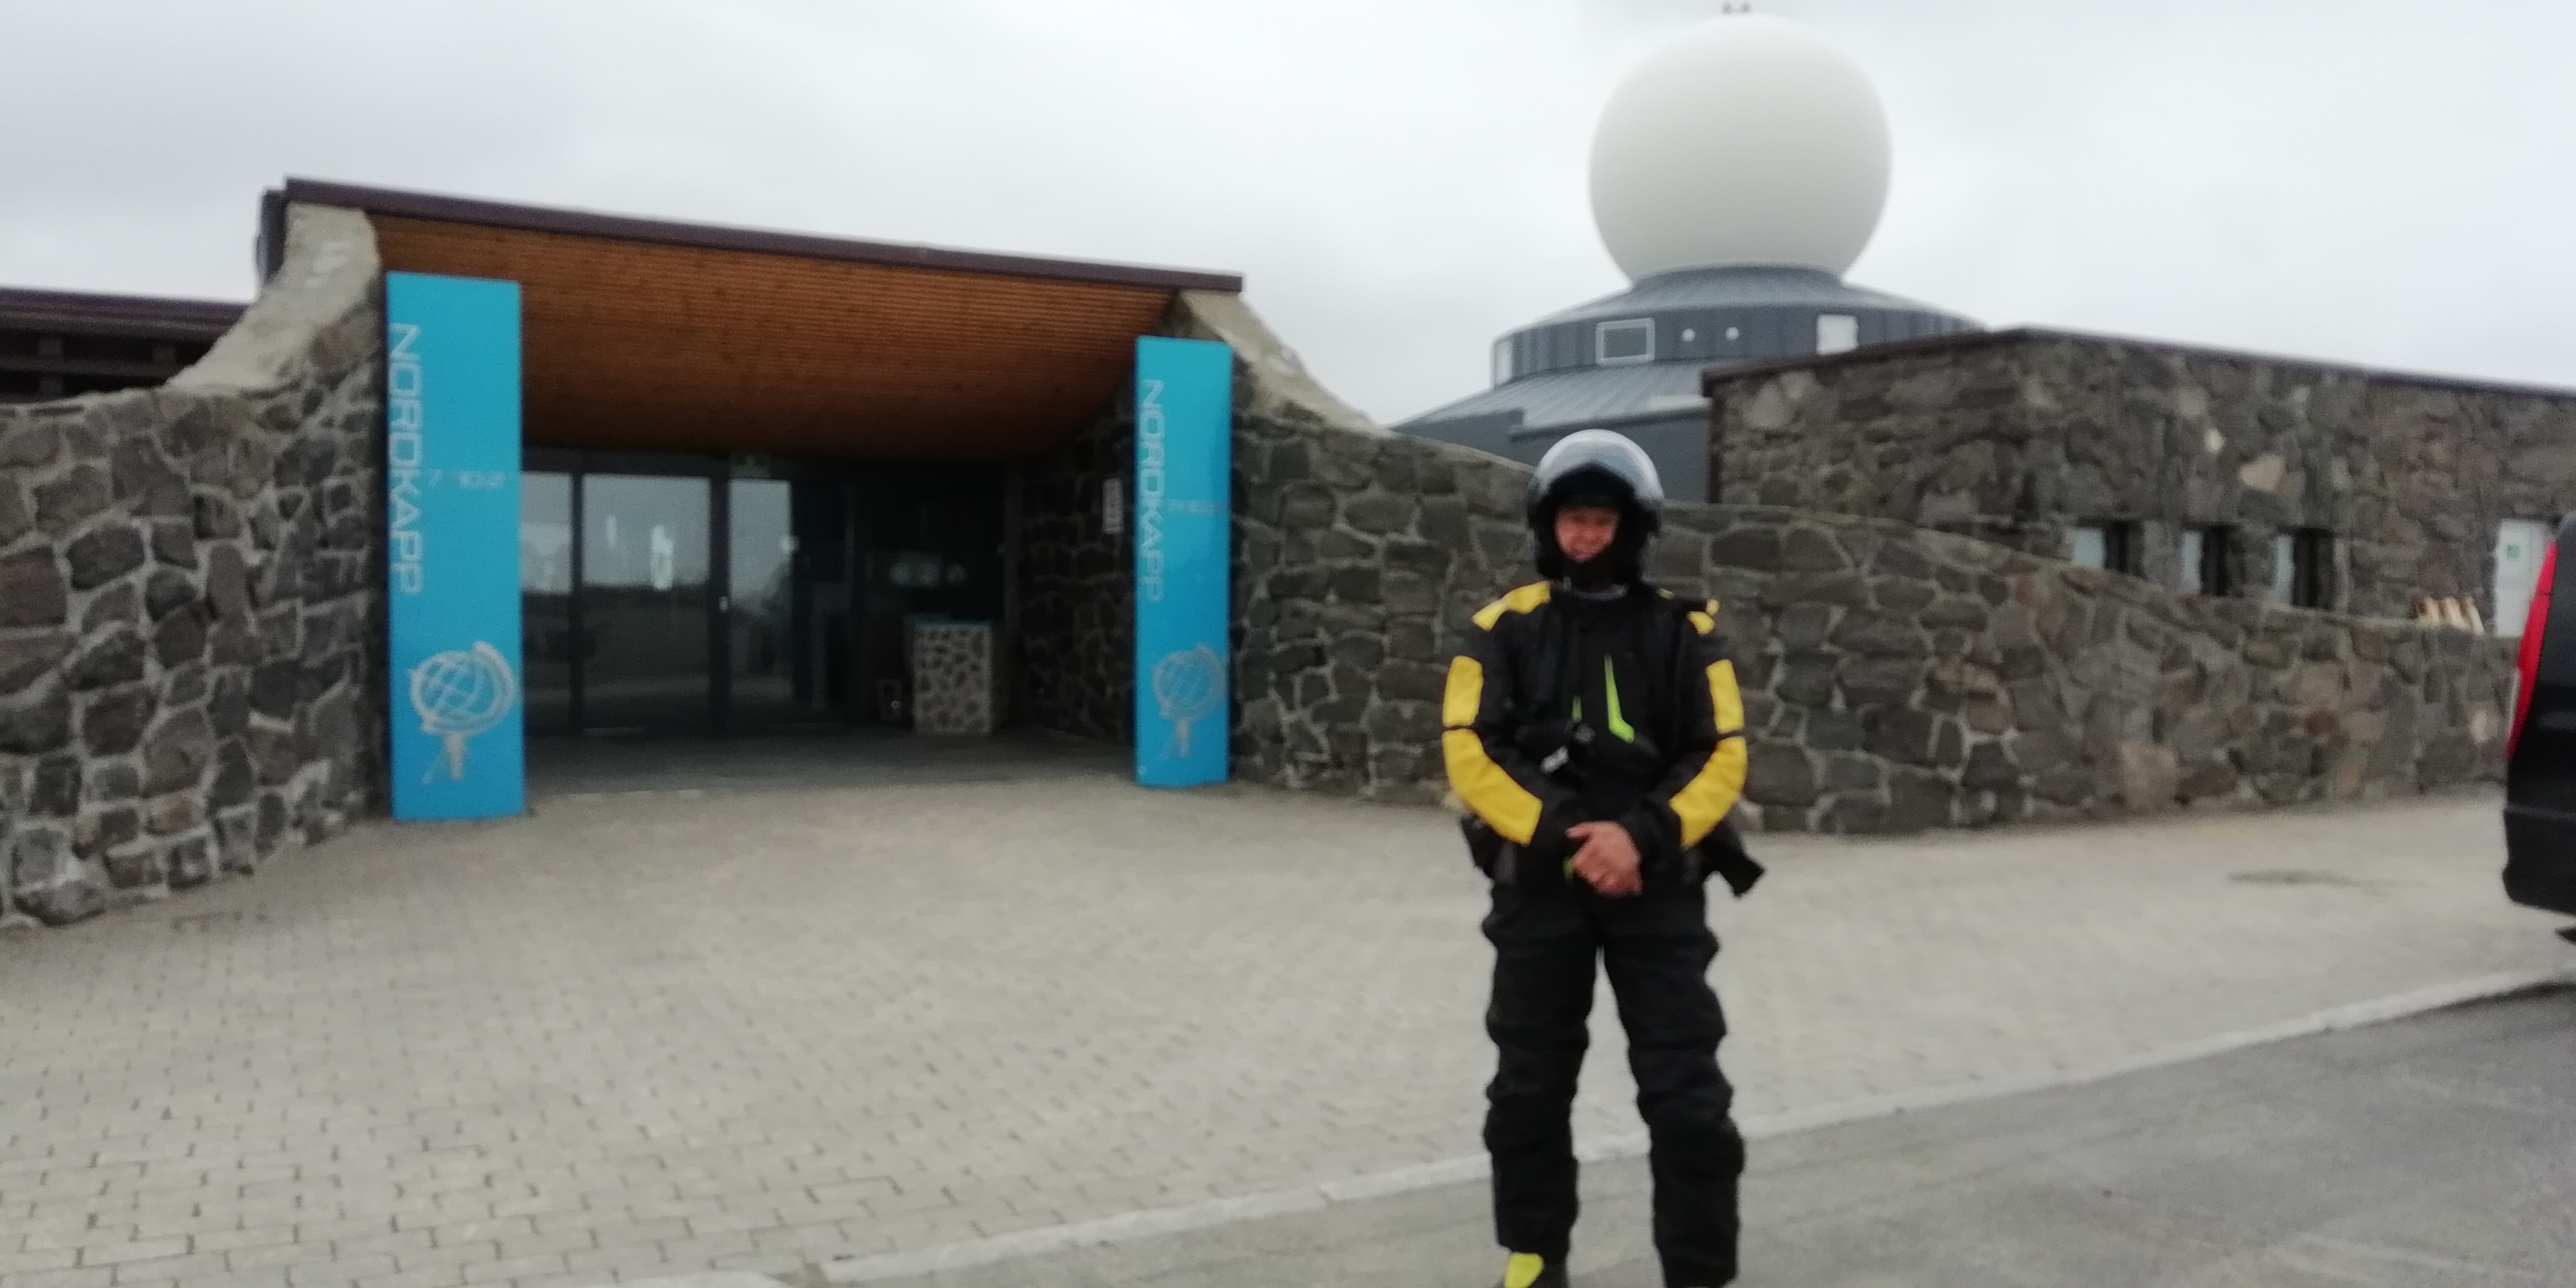 Uwe at the North Cape